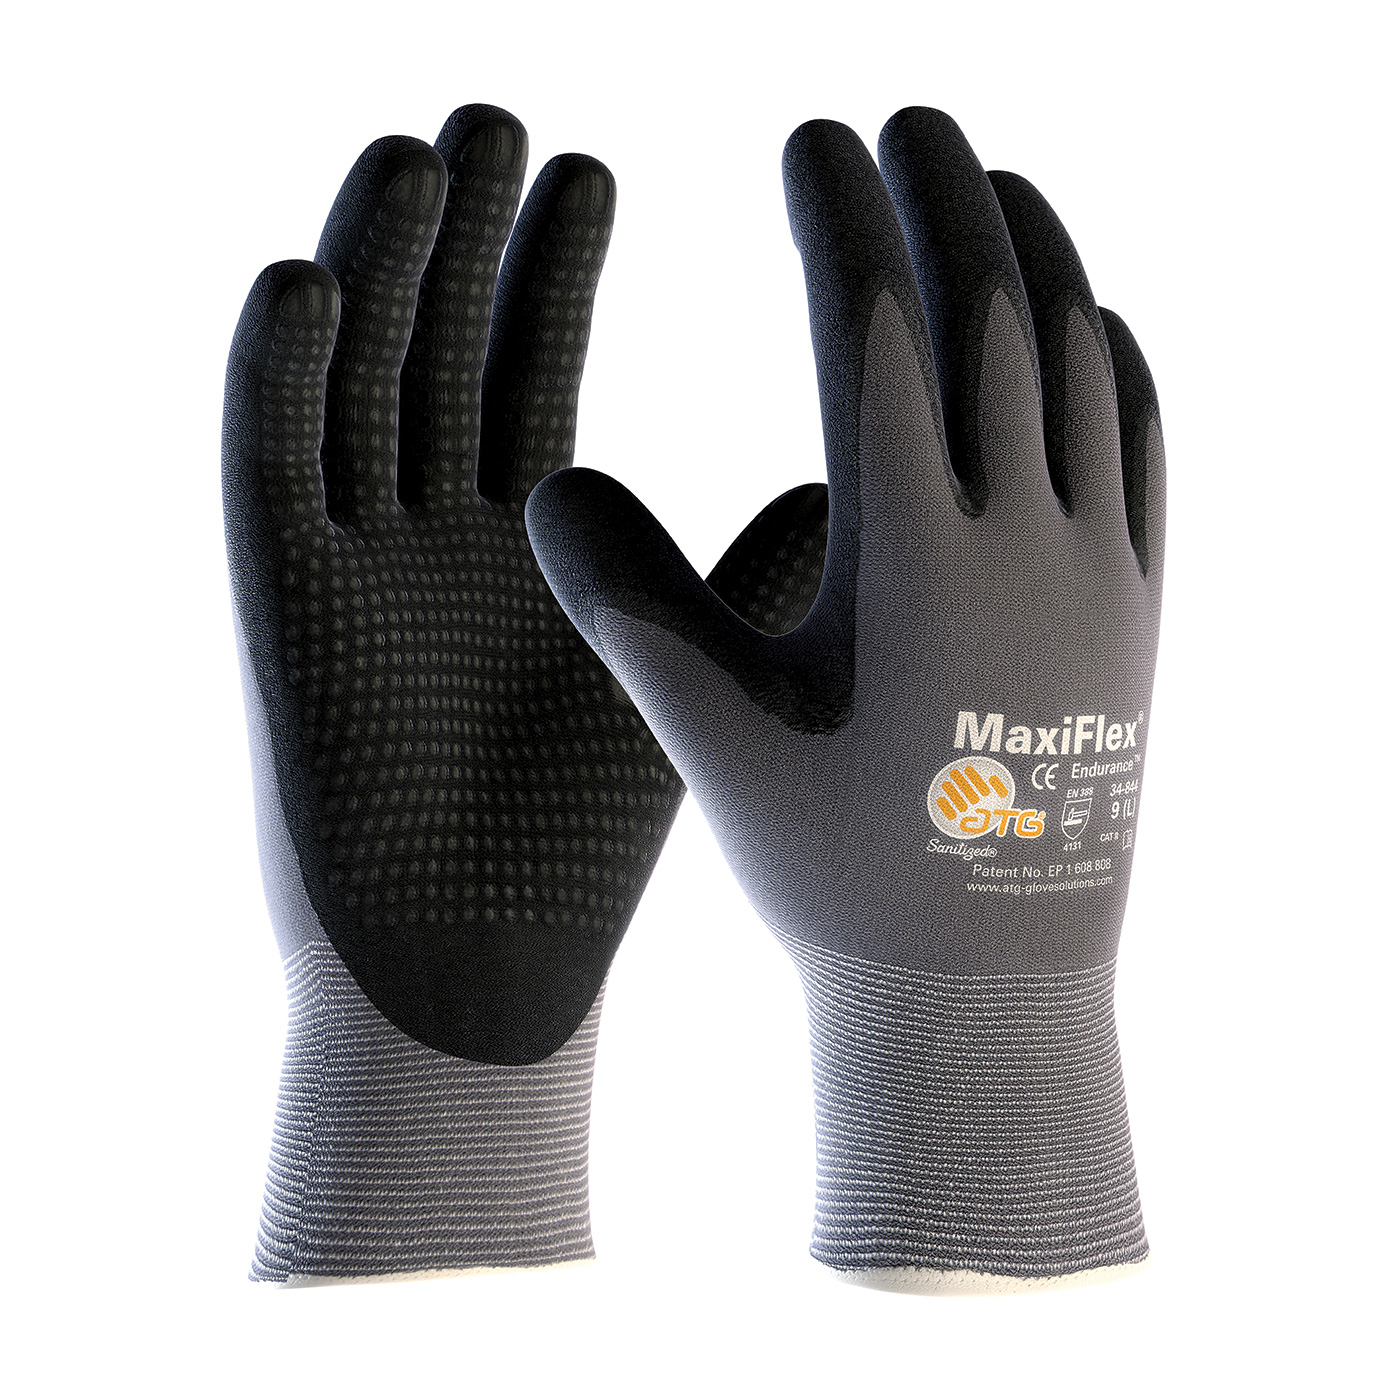 PIP 34-844/S MaxiFlex Endurance Seamless Knit Nylon Glove with Nitrile Coated MicroFoam Grip on Palm & Fingers - Micro Dot Palm - Small PID-34 844 SM